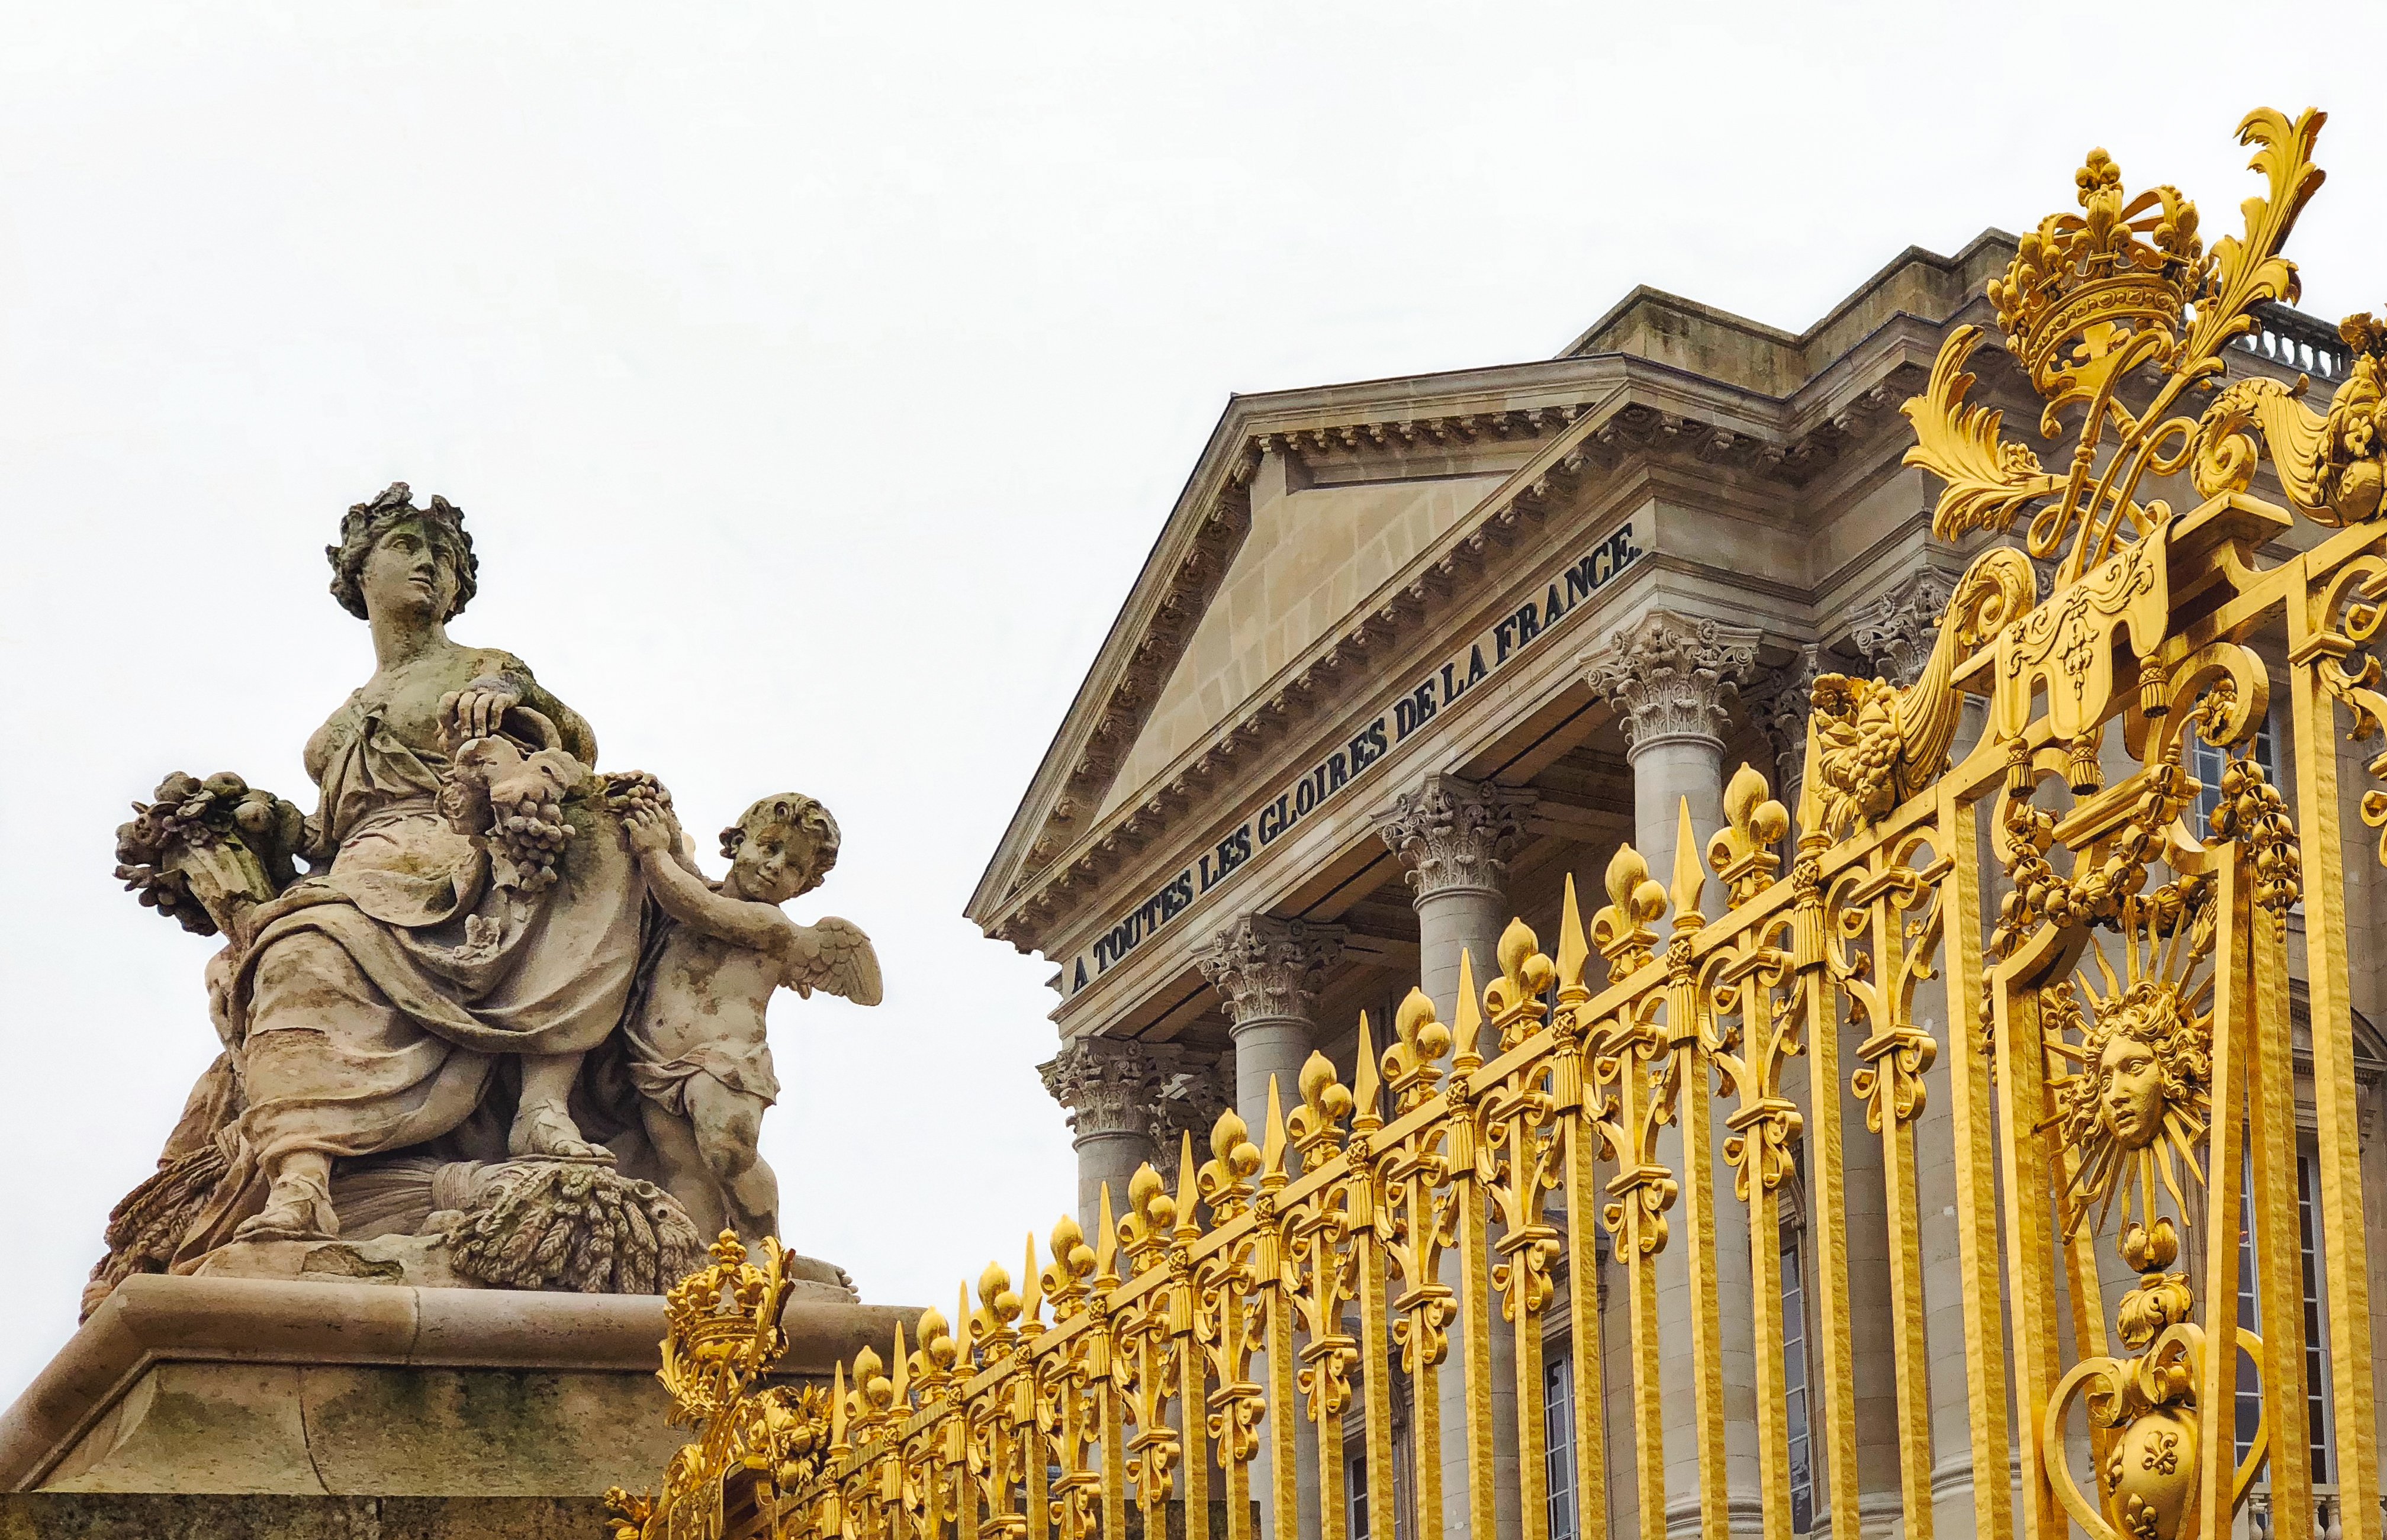 Statues and golden gate of Palace of Versailles